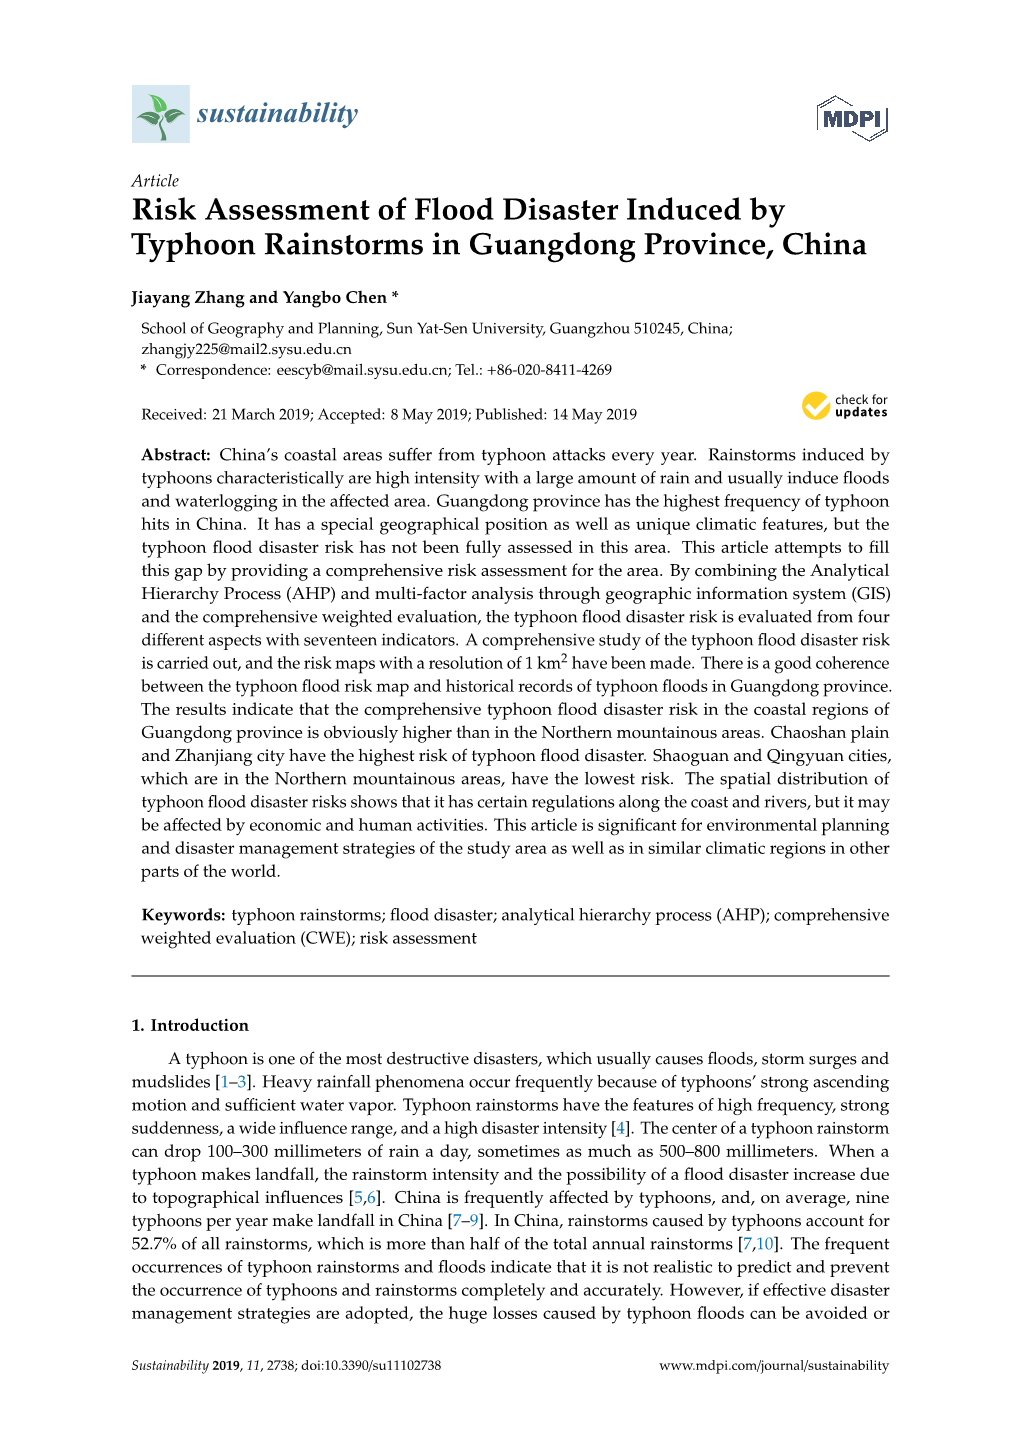 Risk Assessment of Flood Disaster Induced by Typhoon Rainstorms in Guangdong Province, China